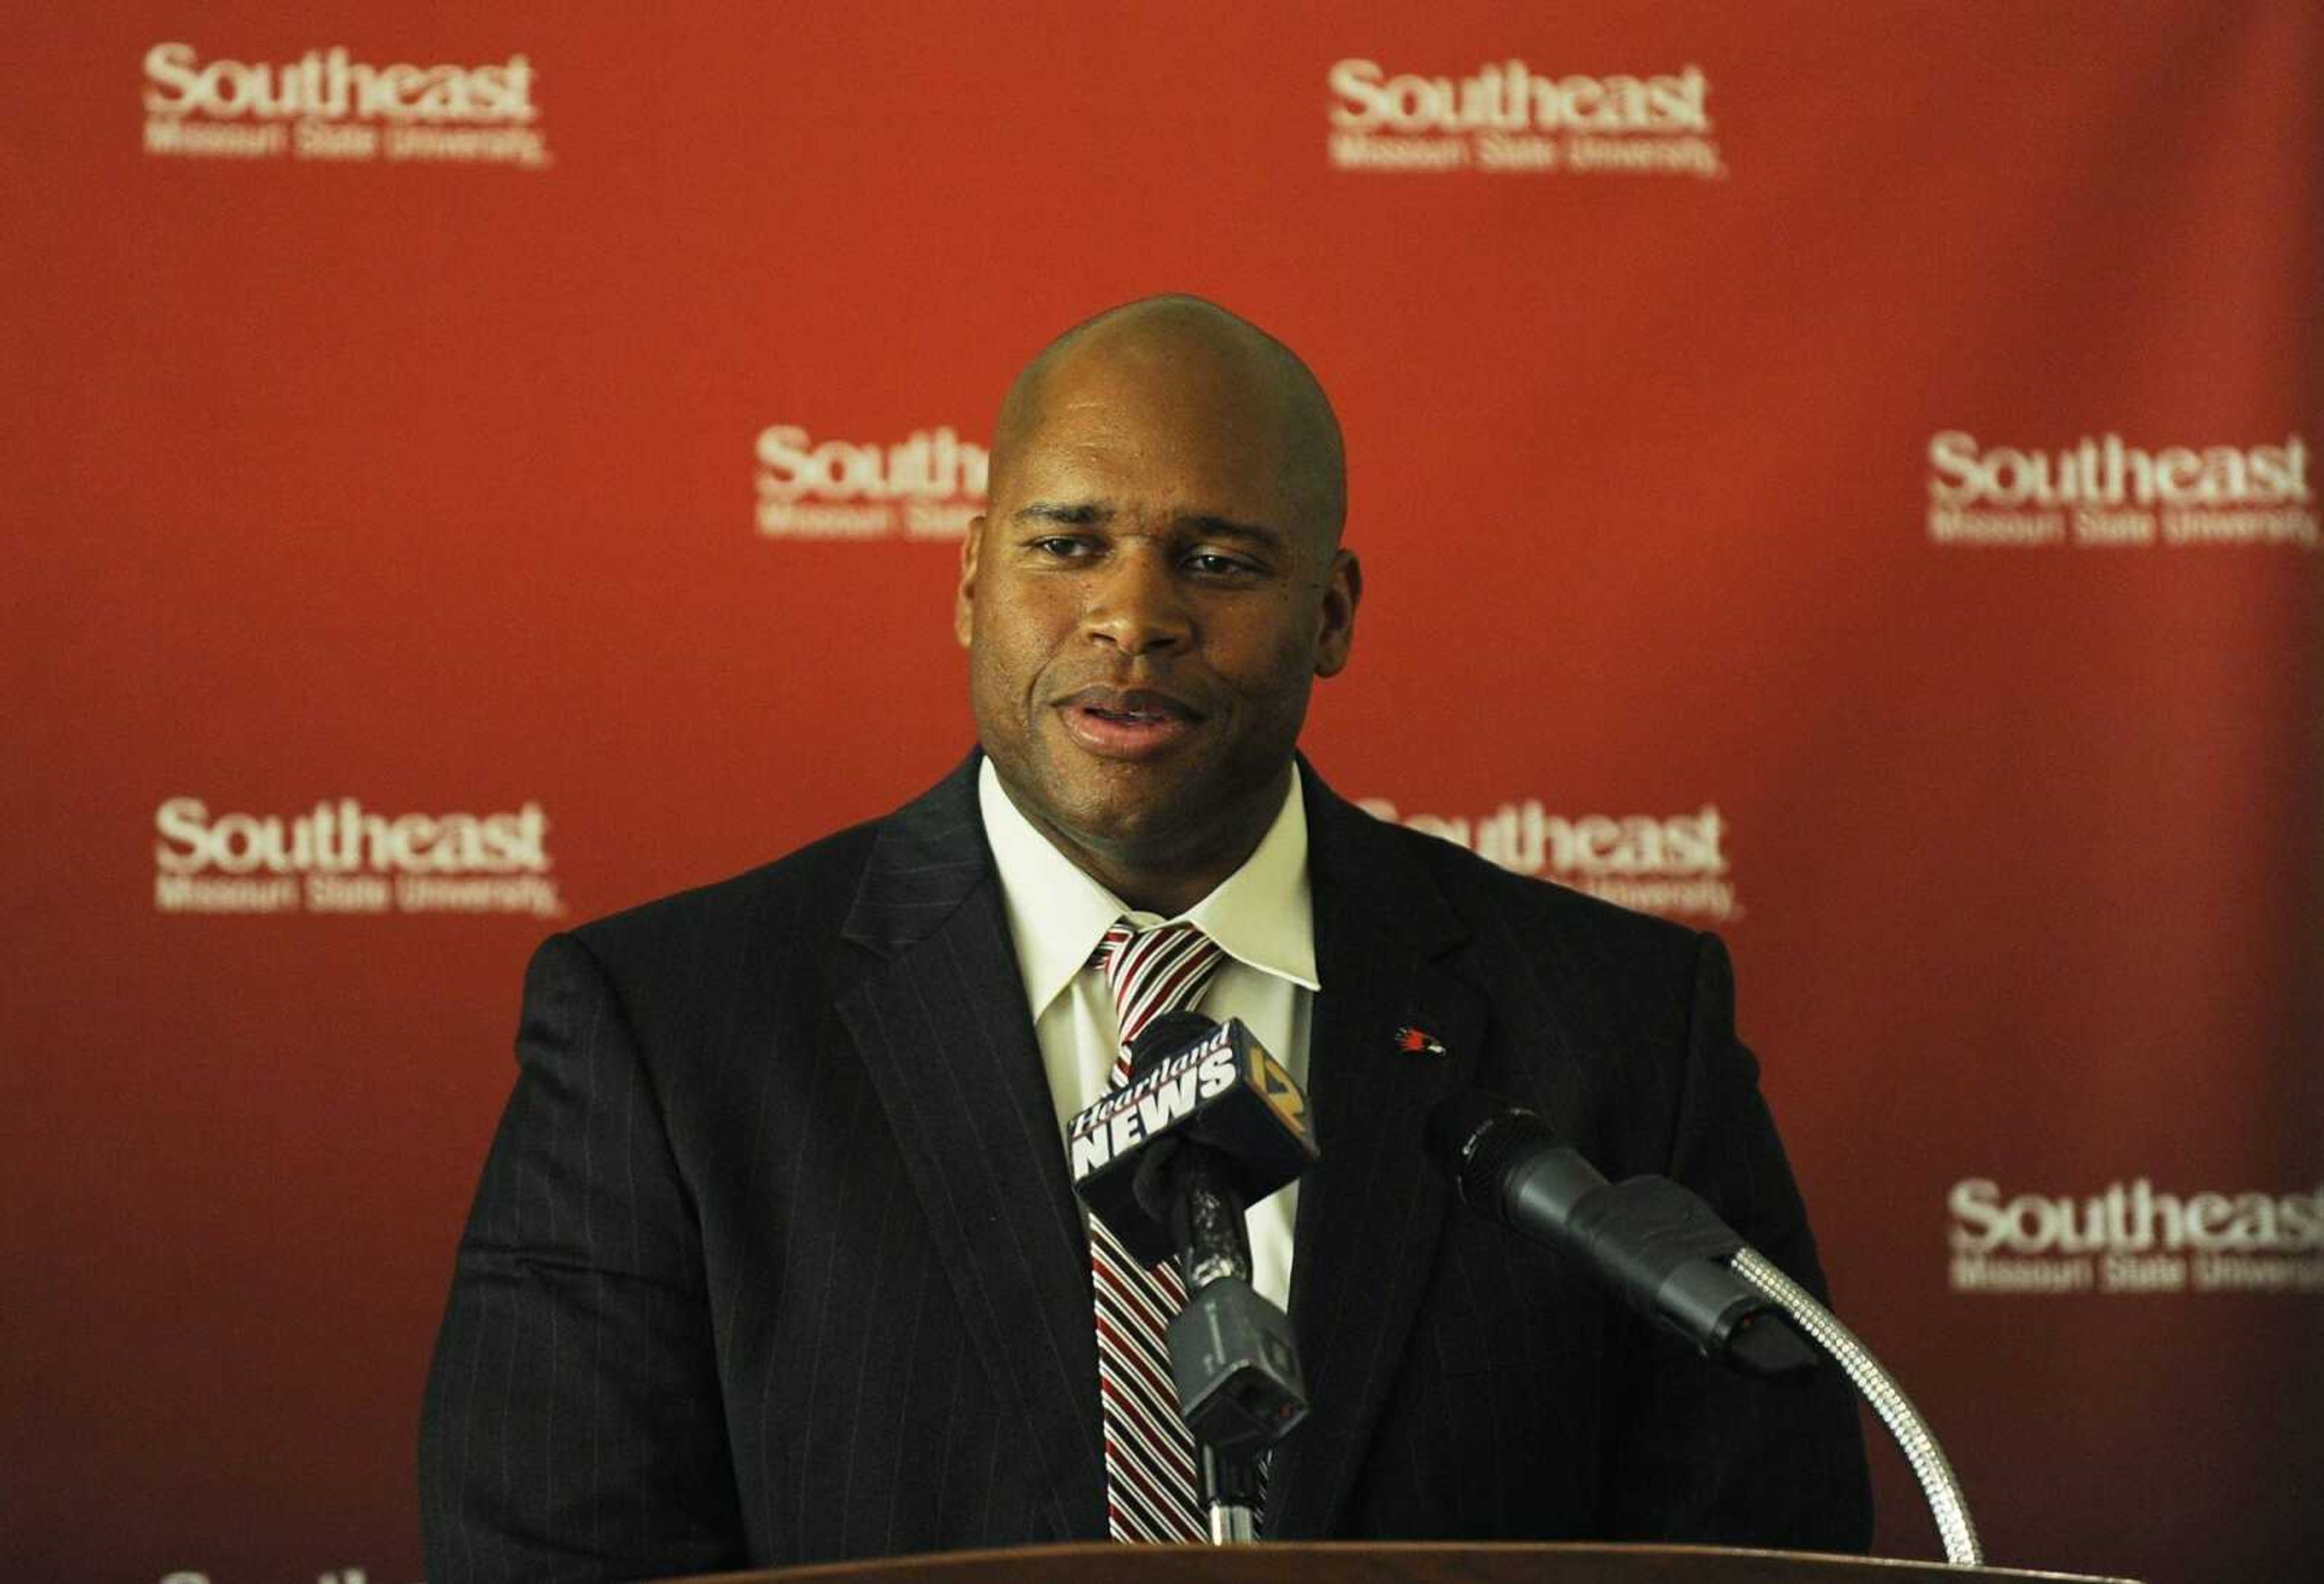 Mark Alnutt was announced the new athletic director for Southeast at a press conference Thursday. - Southeast Missourian photo